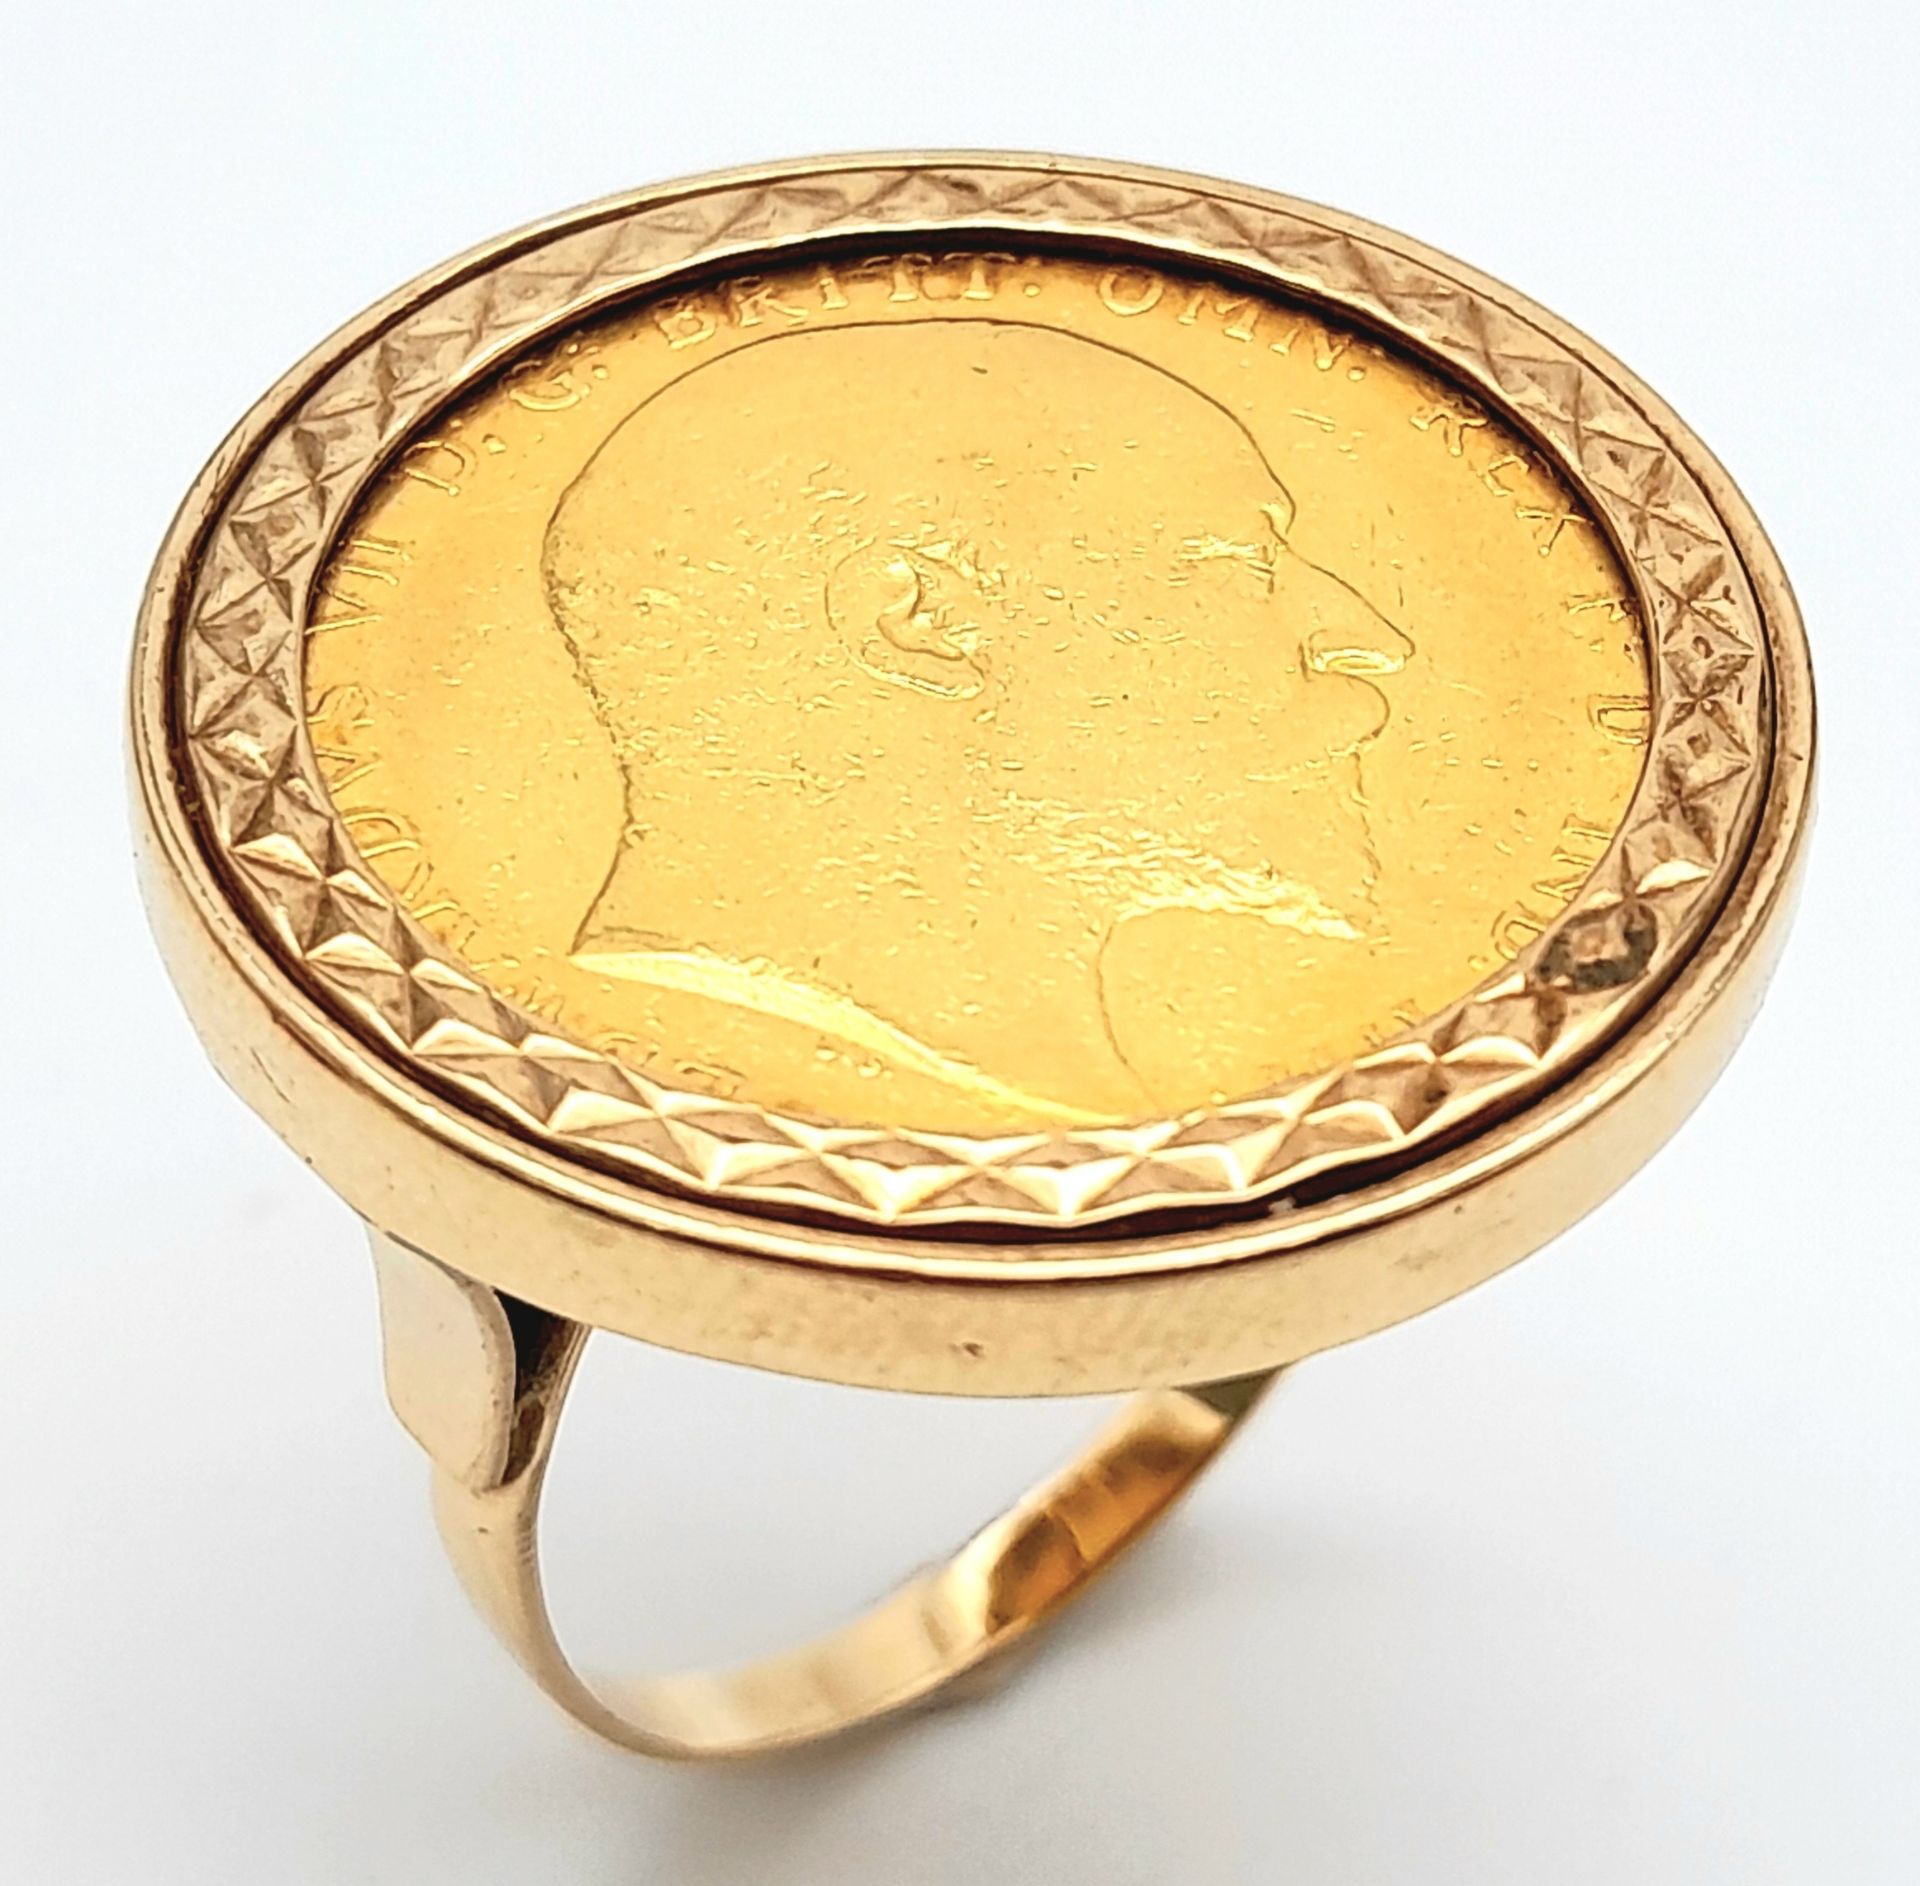 A 9 K yellow gold ring with a full 1902 sovereign which is not welded to the ring and can easily